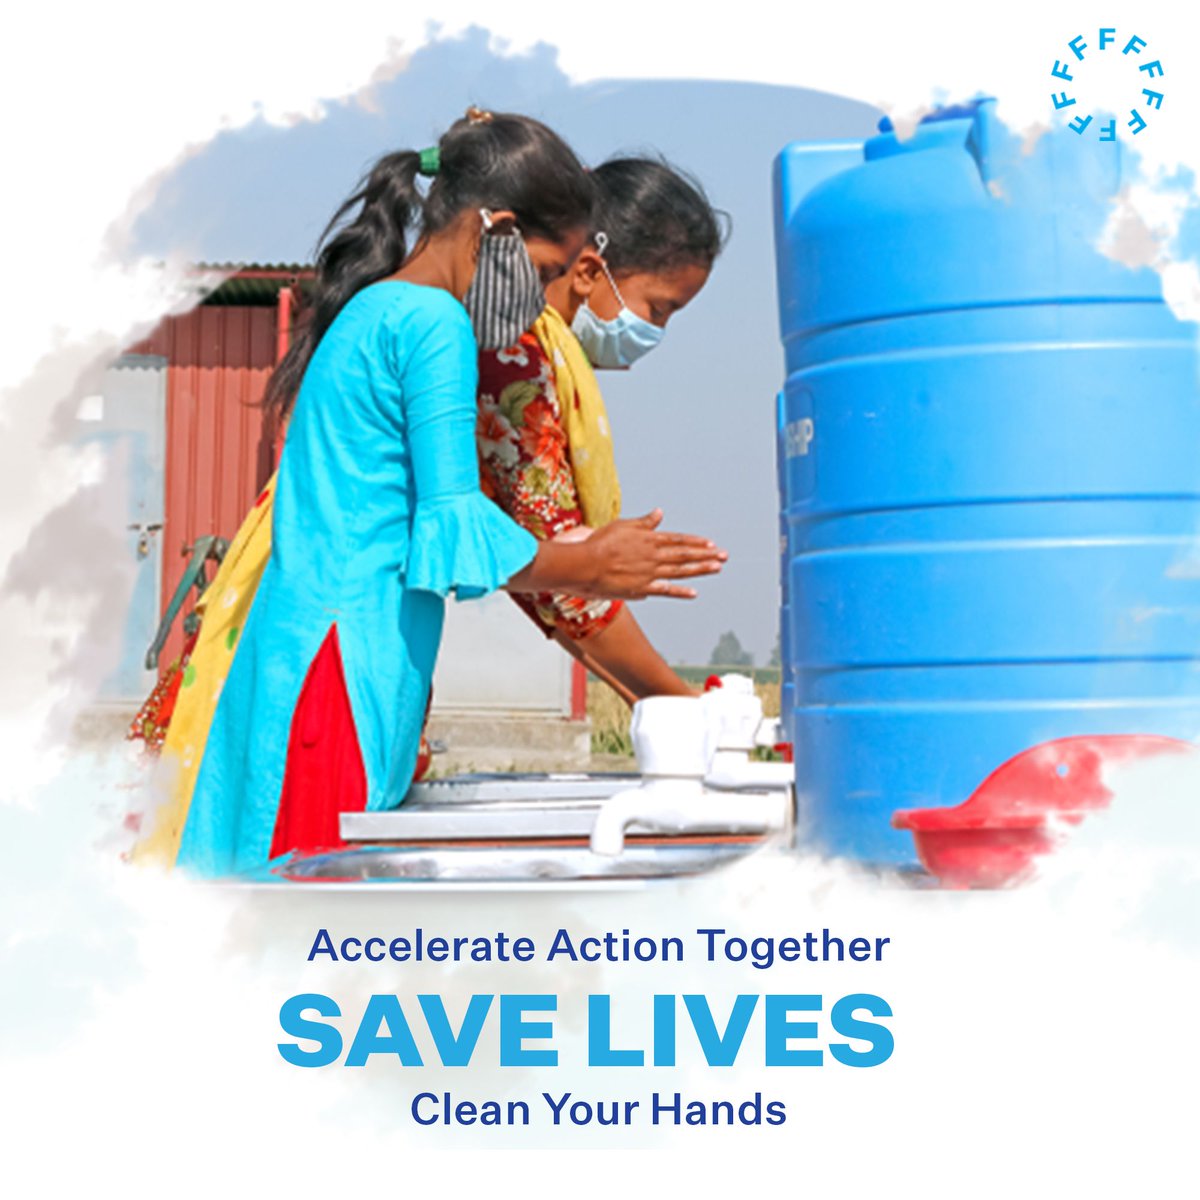 This World Hand Hygiene Day, let's spotlight the crucial role of handwashing in preventing disease and saving lives. Good hygiene is the first line of defense against infections, empowering communities with health and resilience. 

#HealthForAll #SDG3 #SDG6 #GlobalHealth